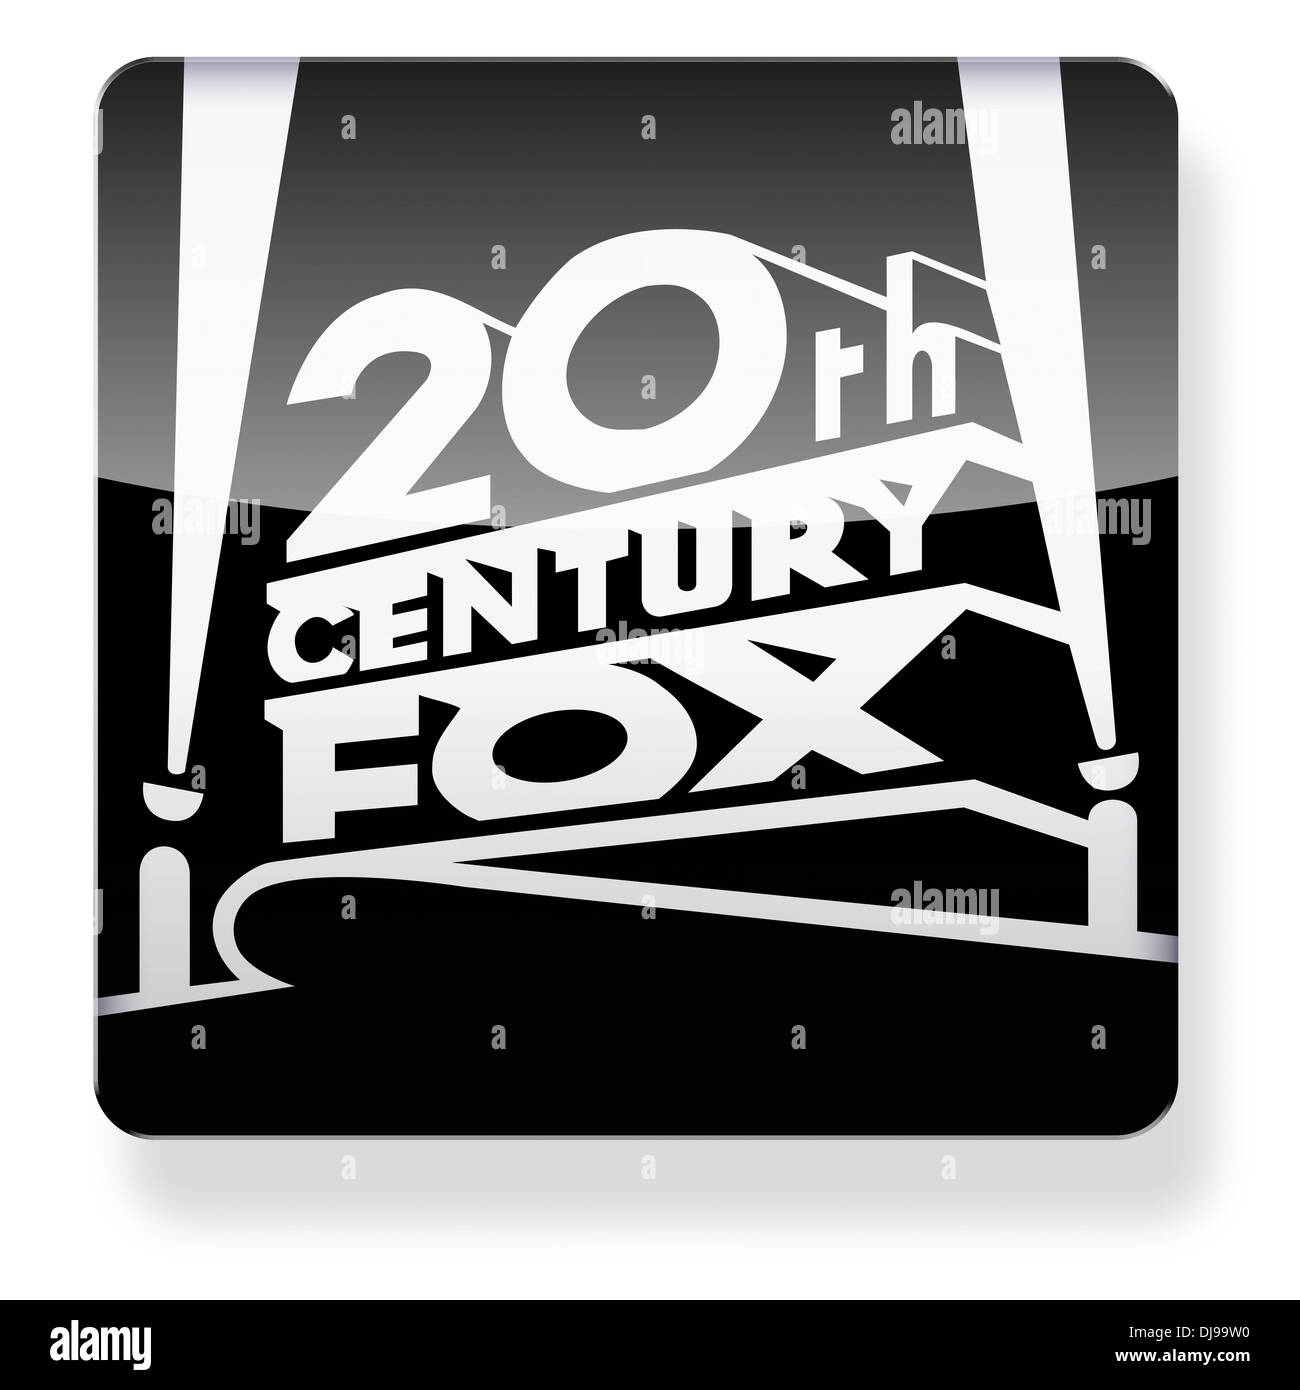 20th Century Fox logo as an app icon. Clipping path included. Stock Photo